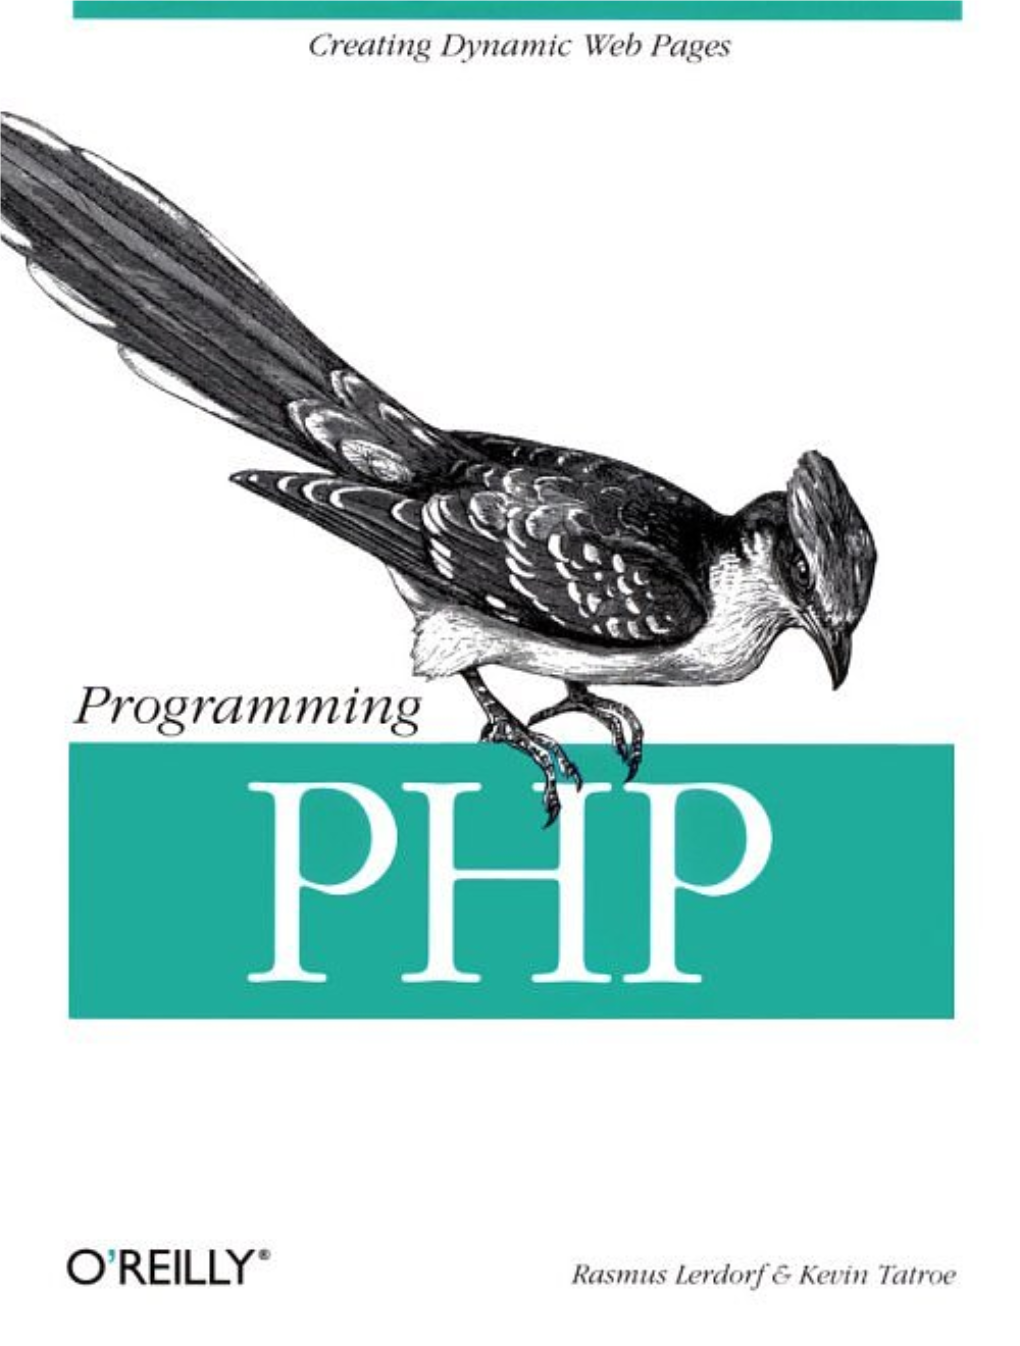 Programming PHP ,TITLE.18349 Page Iii Wednesday, March 13, 2002 11:52 AM